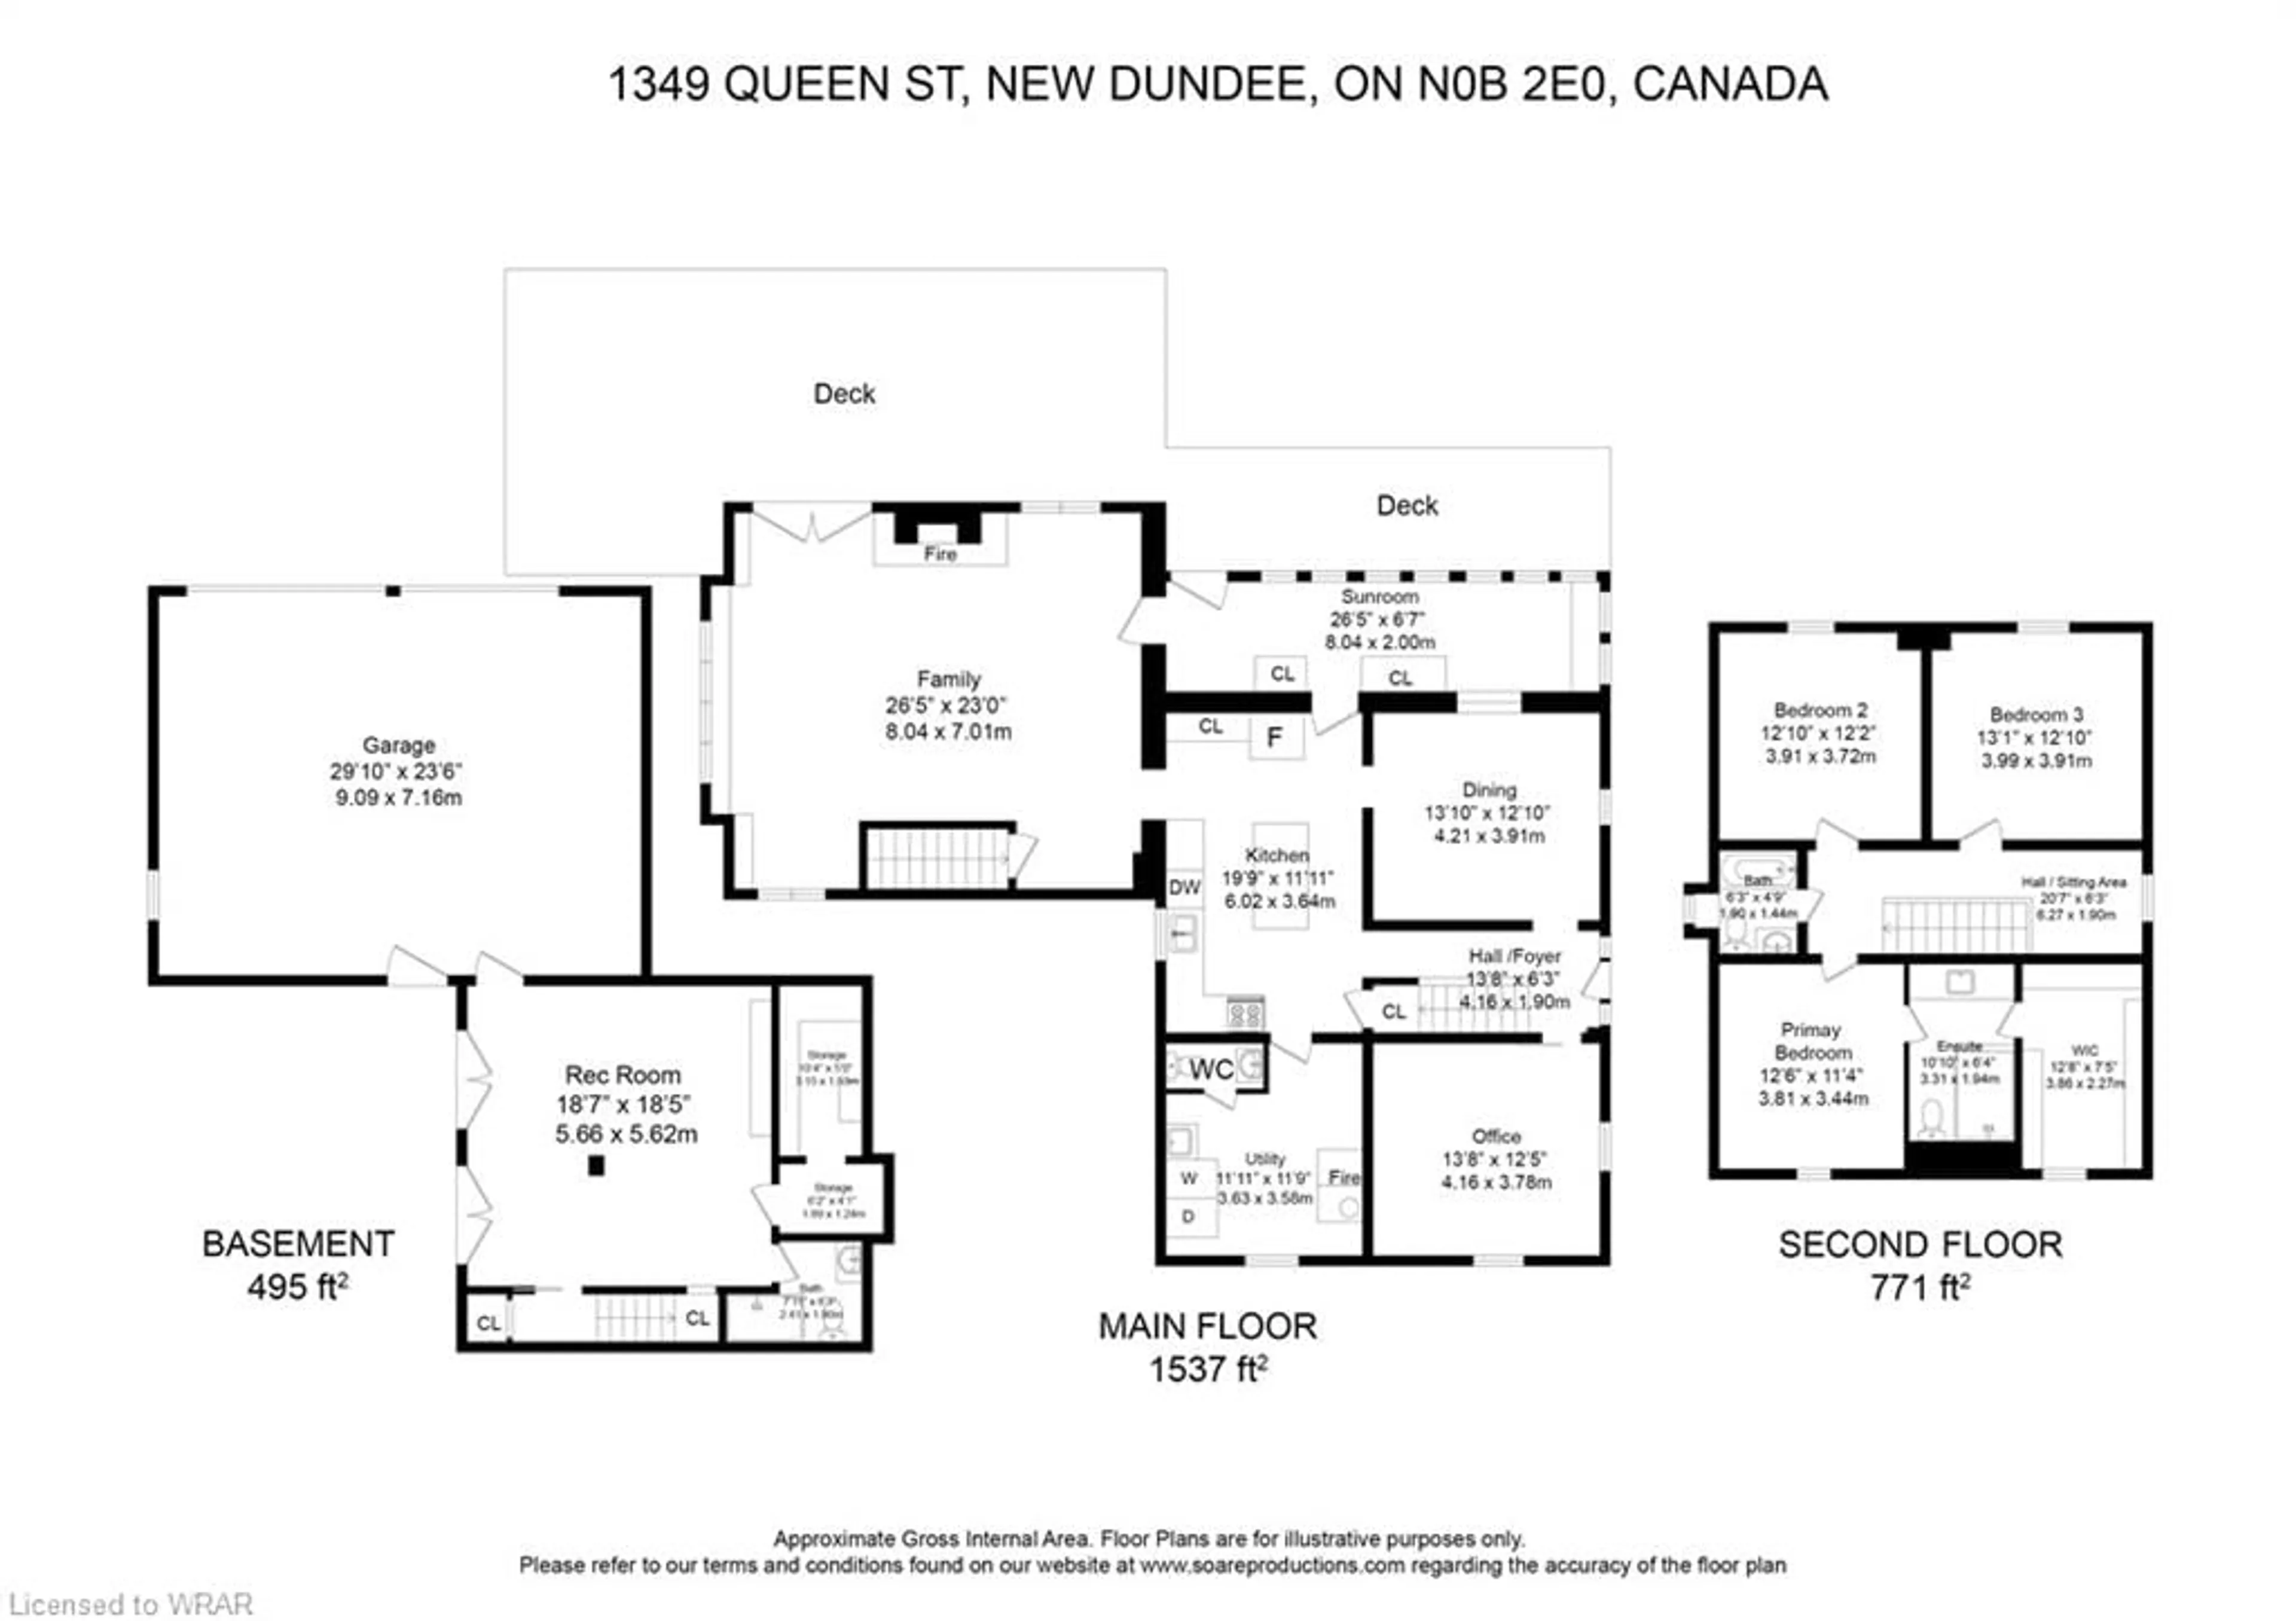 Floor plan for 1349 Queen St, New Dundee Ontario N0B 2E0